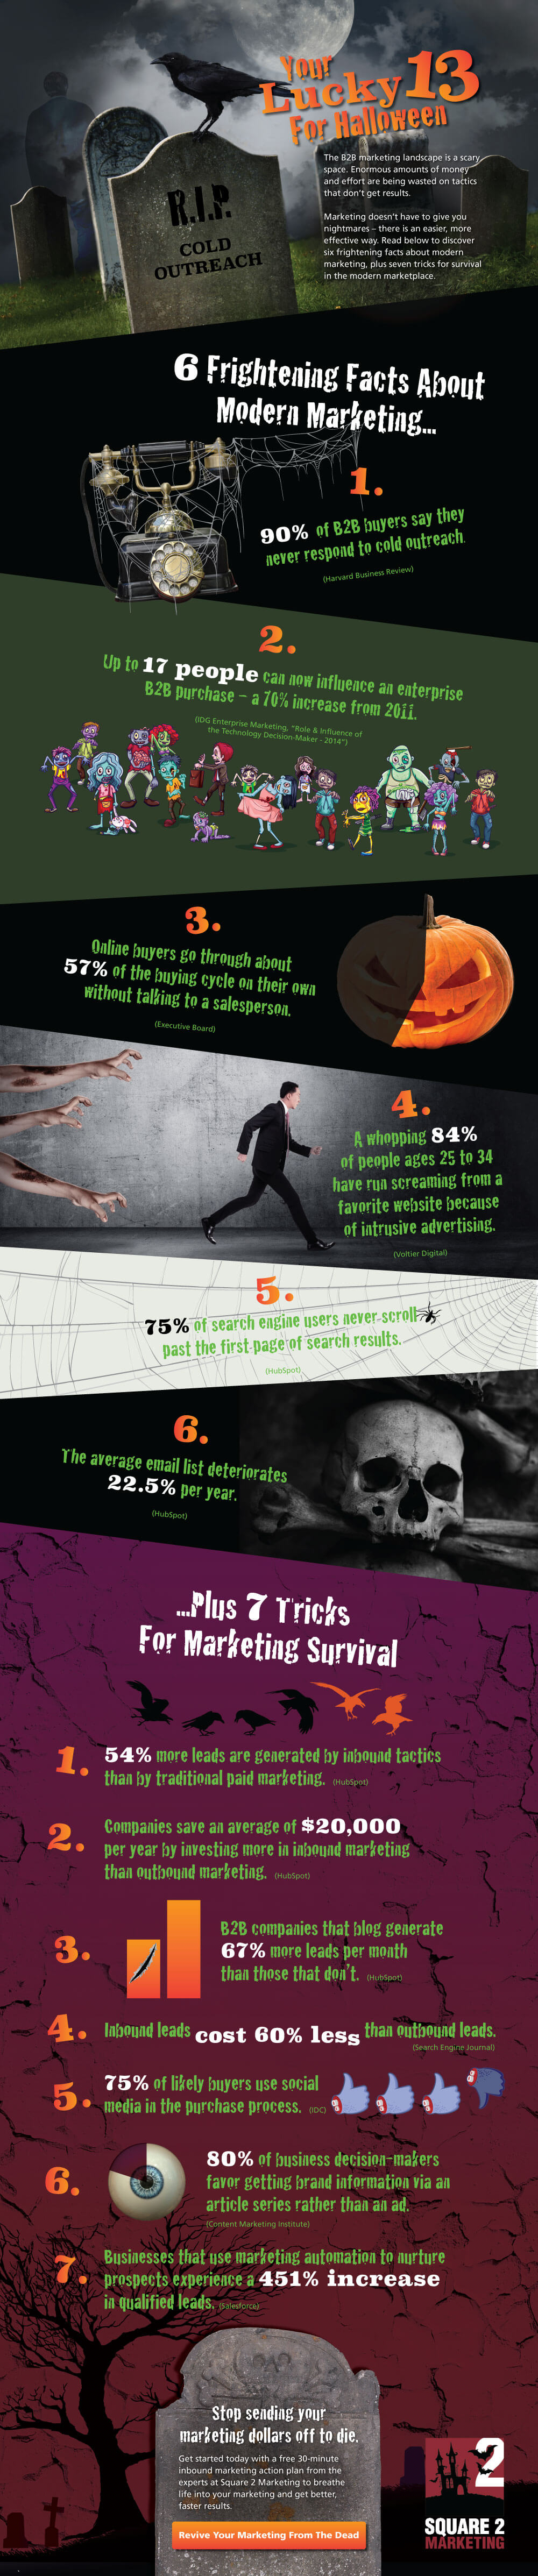 Infographic: 6 Frightening Facts About Modern Marketing Plus 7 Tips For Marketing Survival